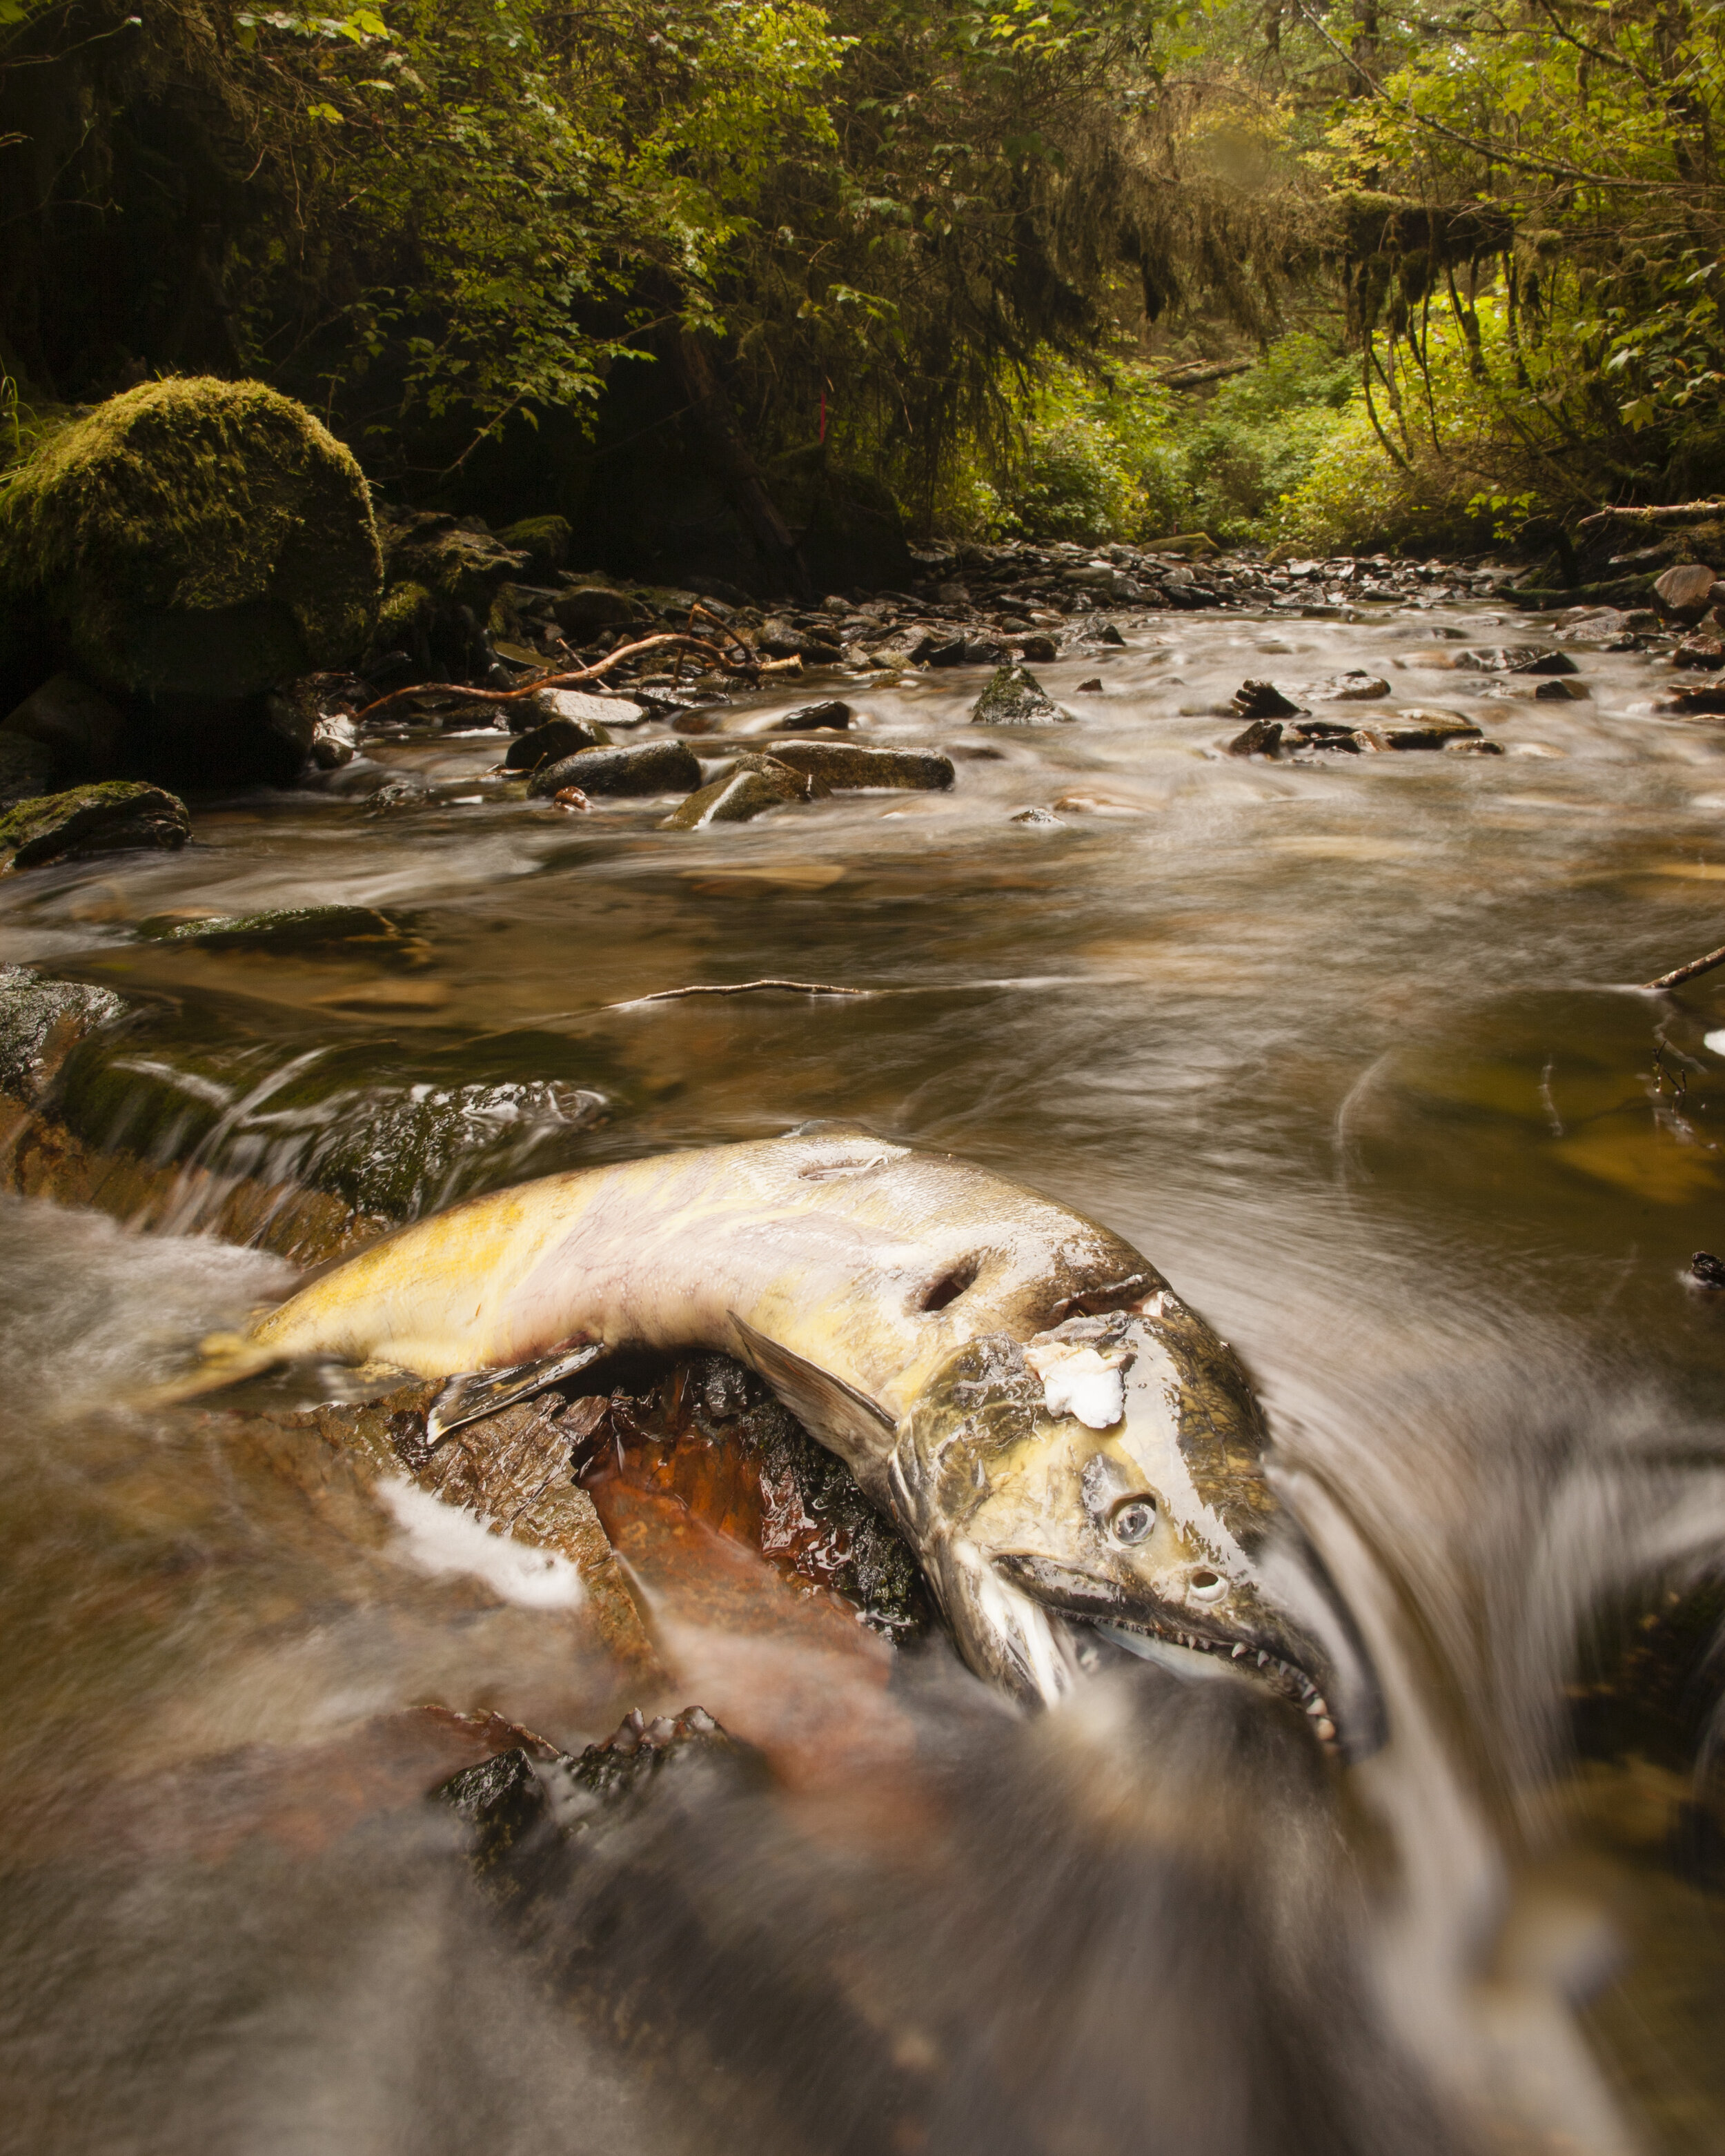  A chum salmon decomposes in a shallow coastal stream after spawning. Heiltsuk First Nation unceded traditional territory. 